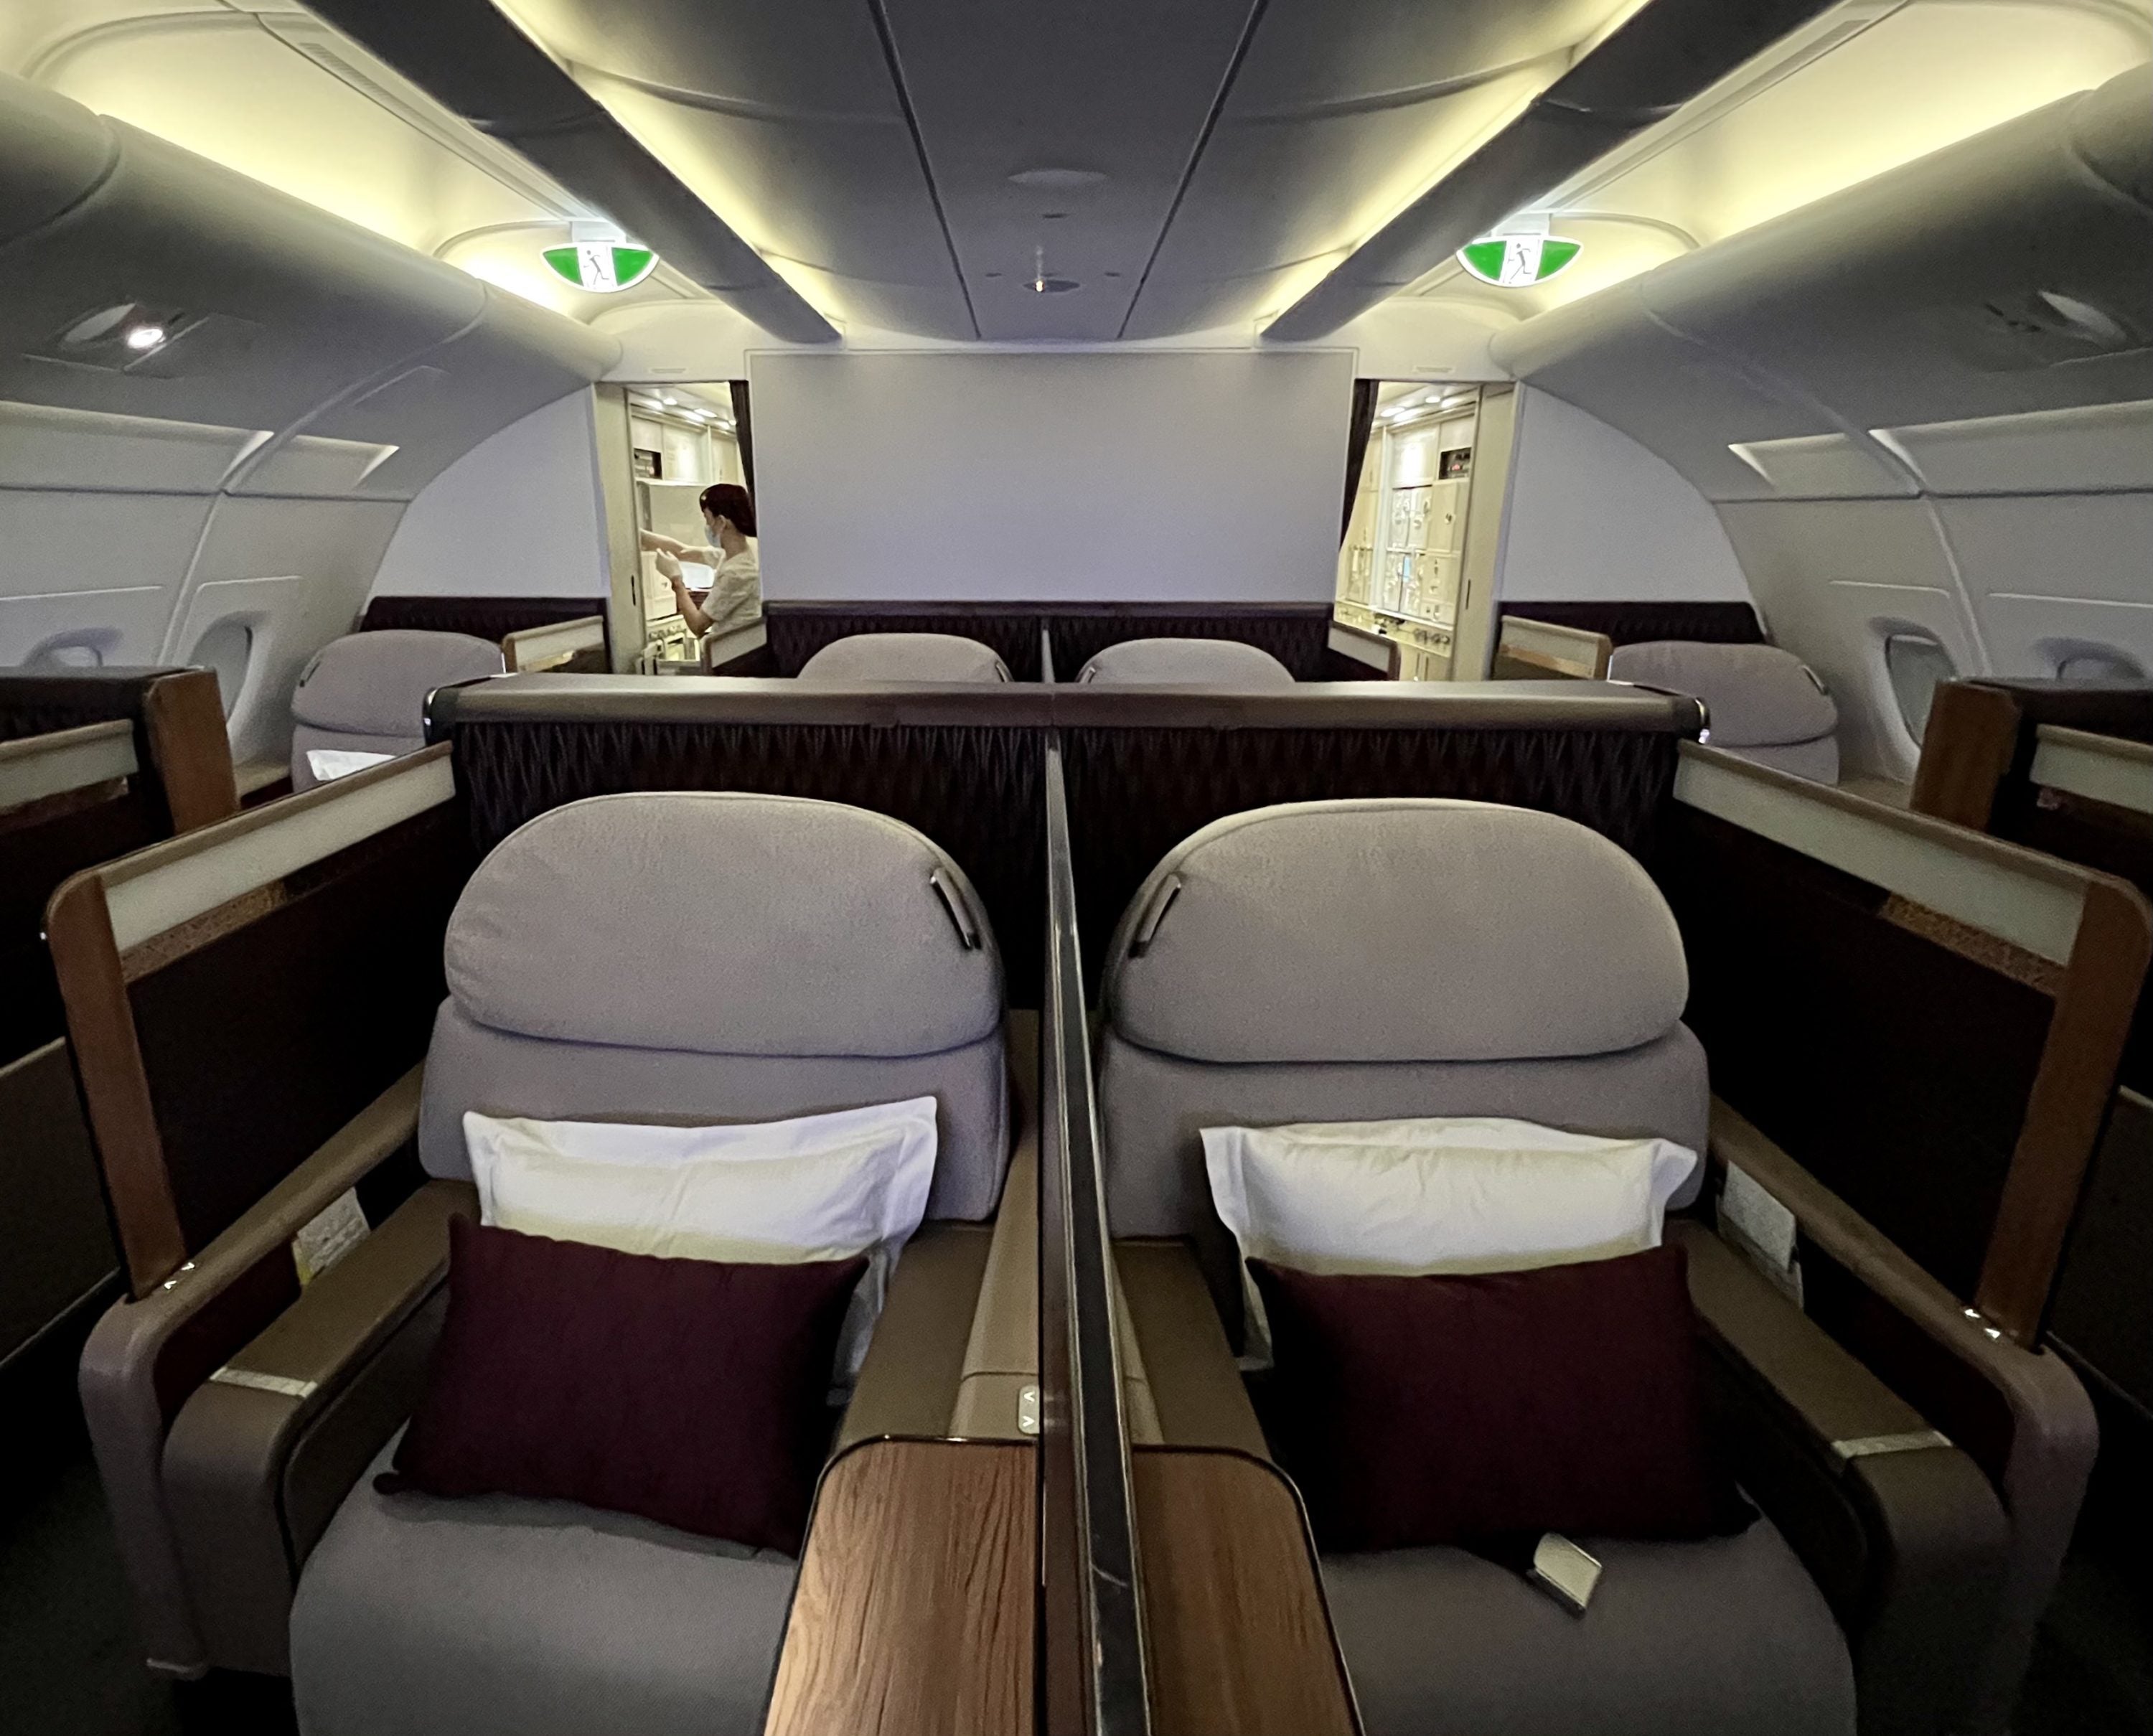 Qatar Airways Airbus A380 first class cabin from front